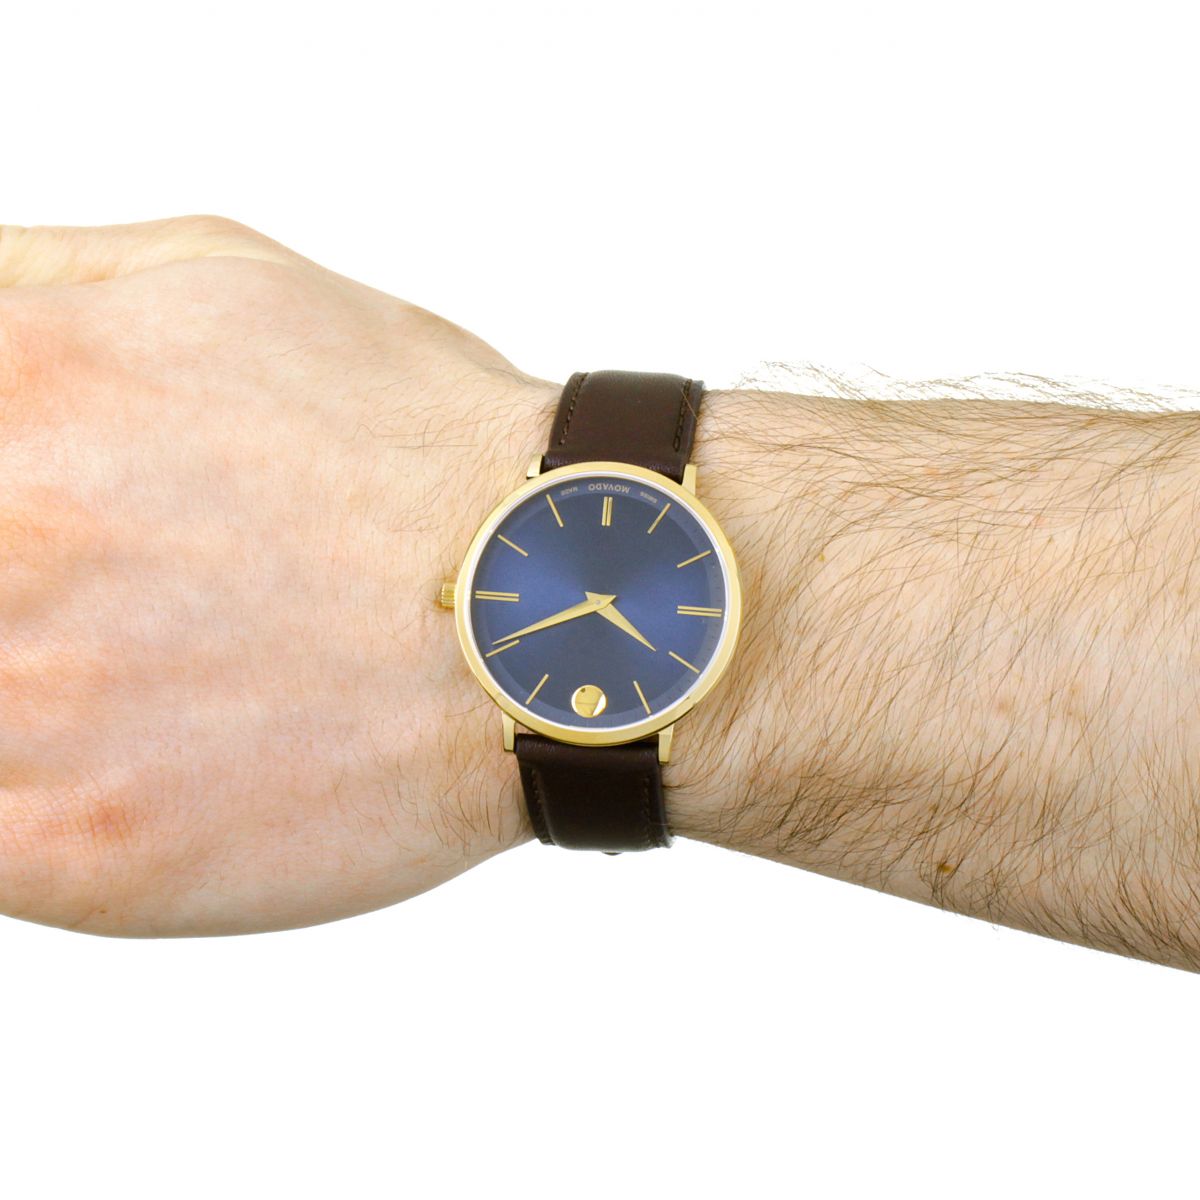 Blue Dial Luxury Watches You’ll Love